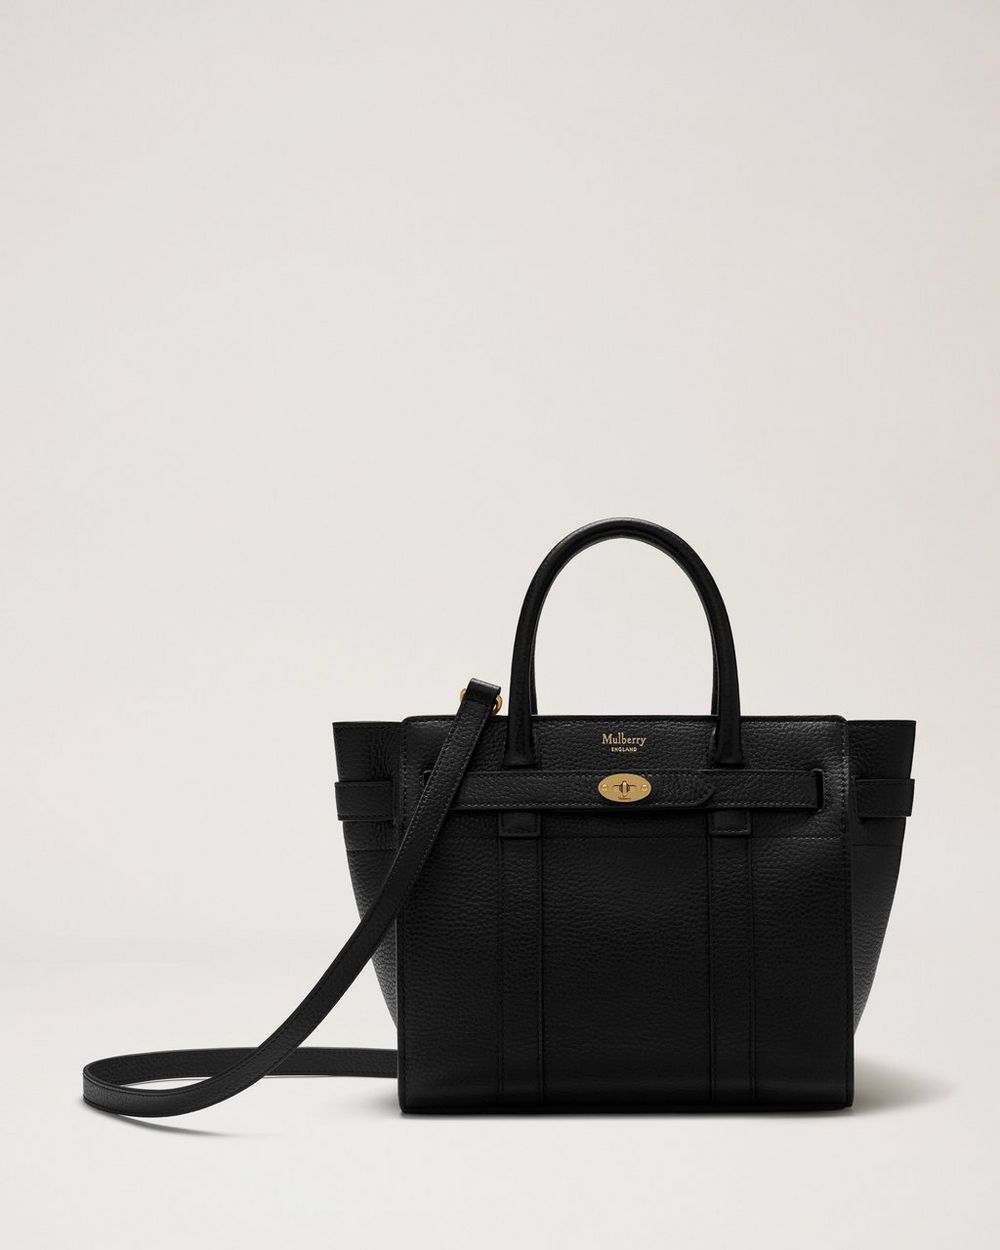 Mulberry Classic Bayswater: Real vs. Fake